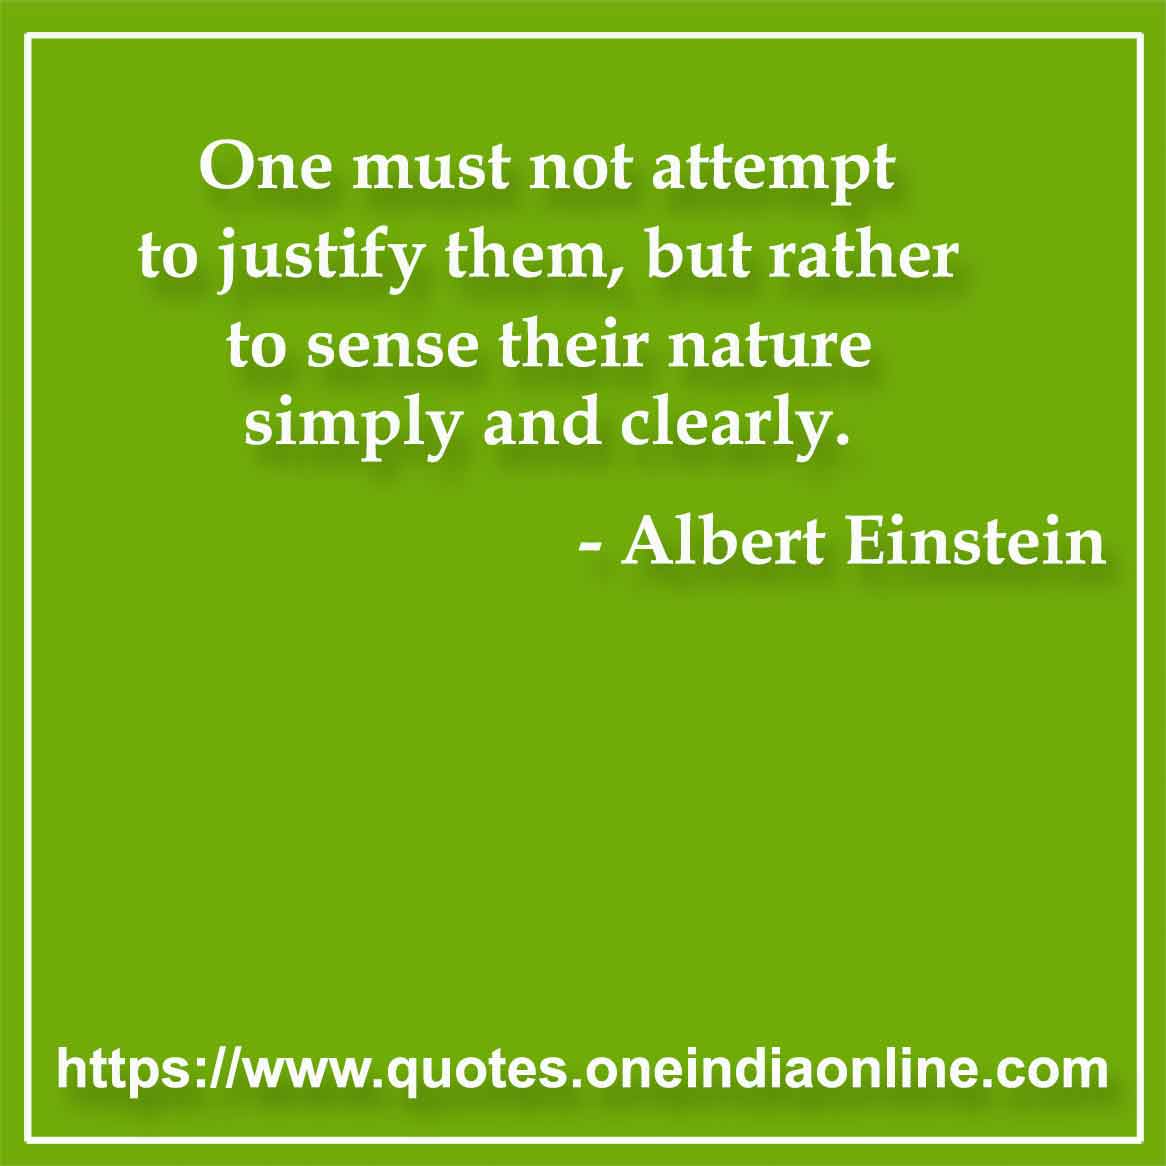 One must not attempt to justify them, but rather to sense their nature simply and clearly.

- Acceptance Quote by Albert Einstein 1879 - 1955